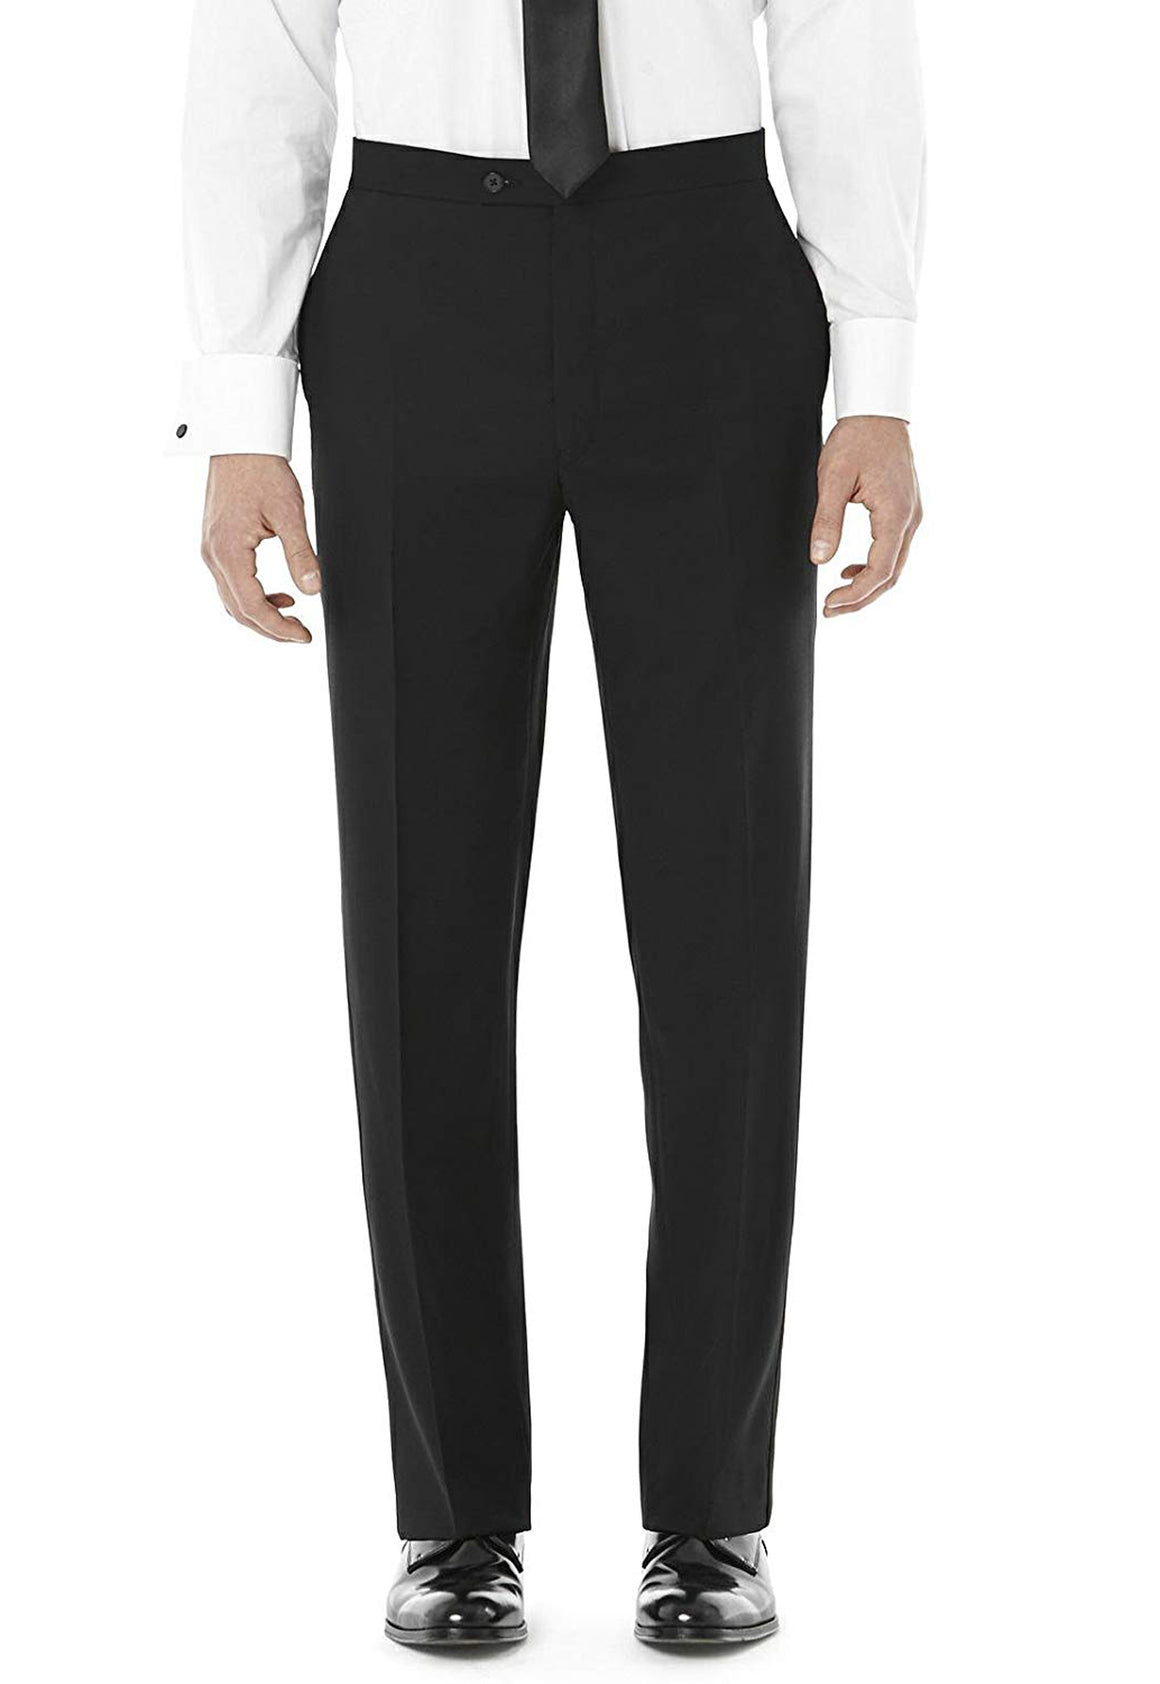 Made Suits Singapore Tailor  HighWaisted Trousers Flatter Every Men   Should you wear high waisted trousers